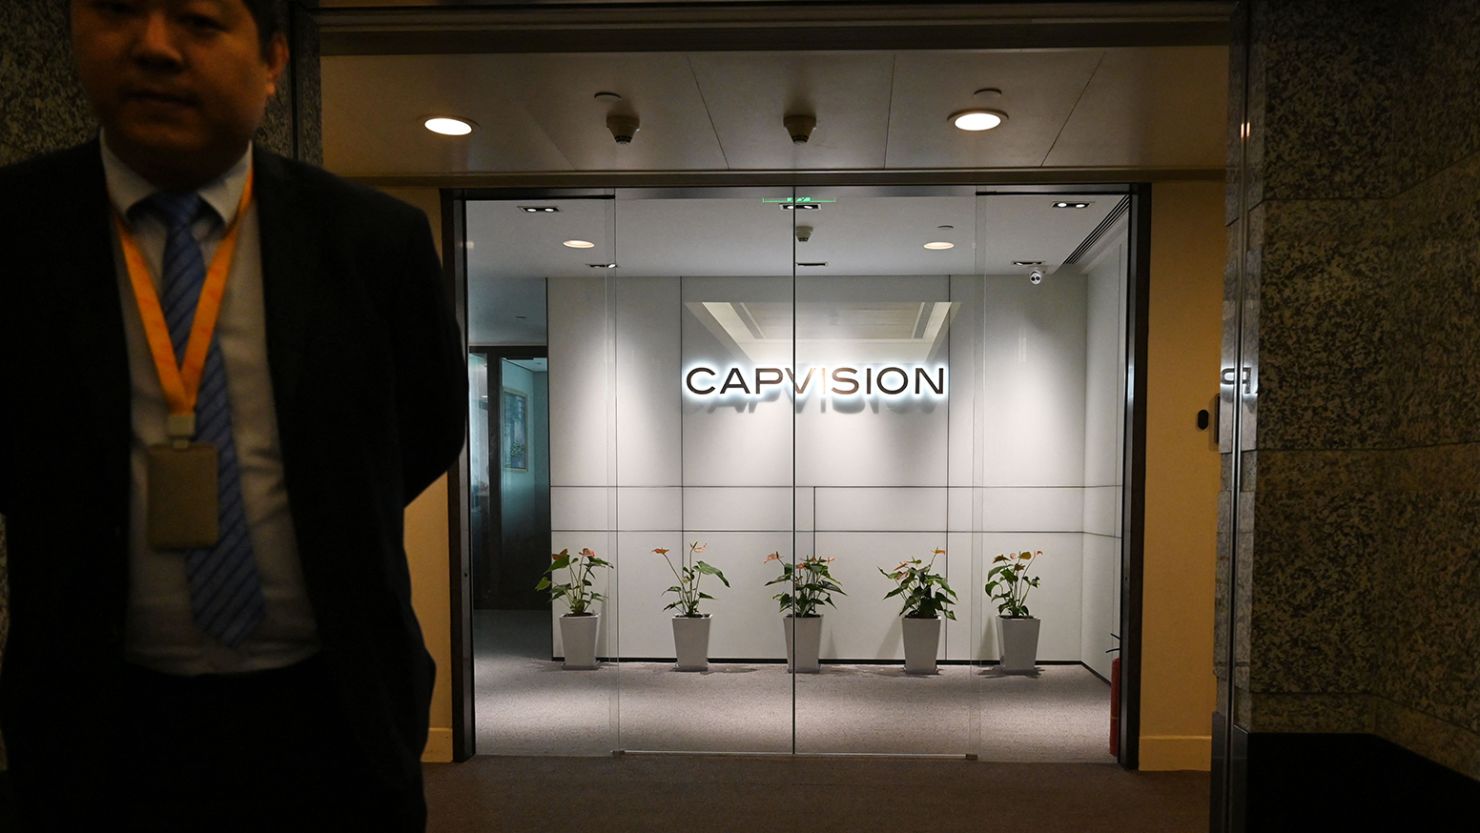 Capvision's office in Beijing was raided by state security authorities as part of a broader crackdown.